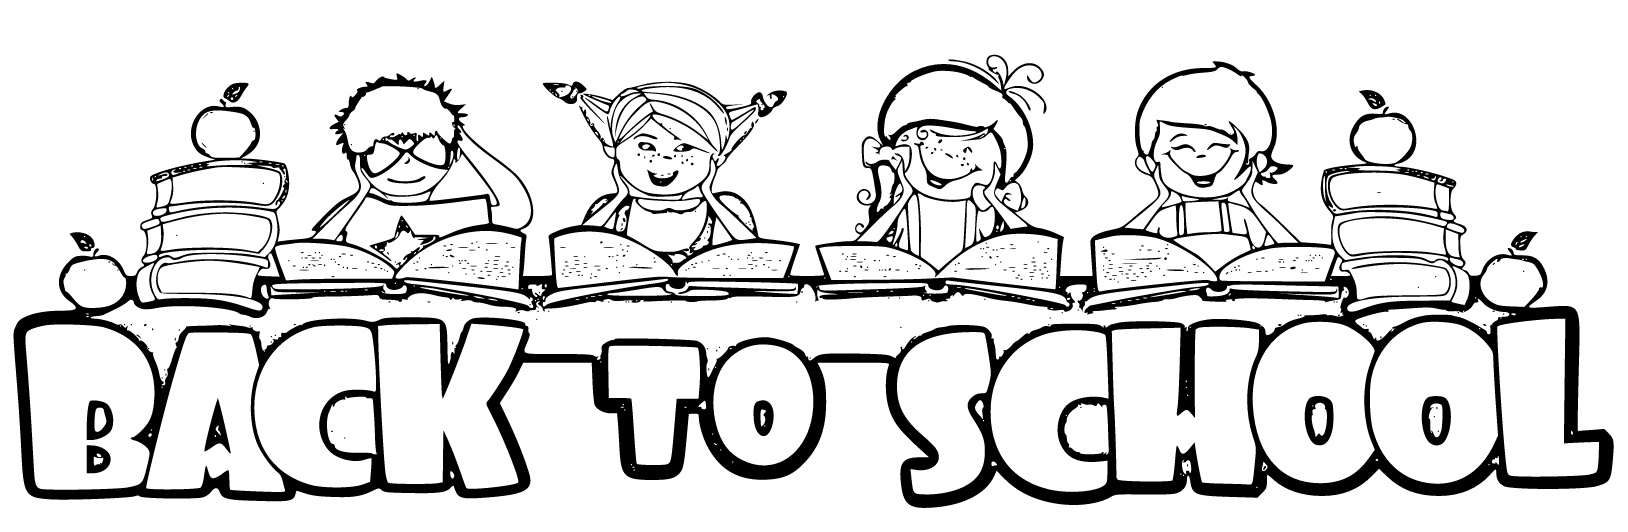 Back to School Coloring Page for Kids - SheetalColor.com